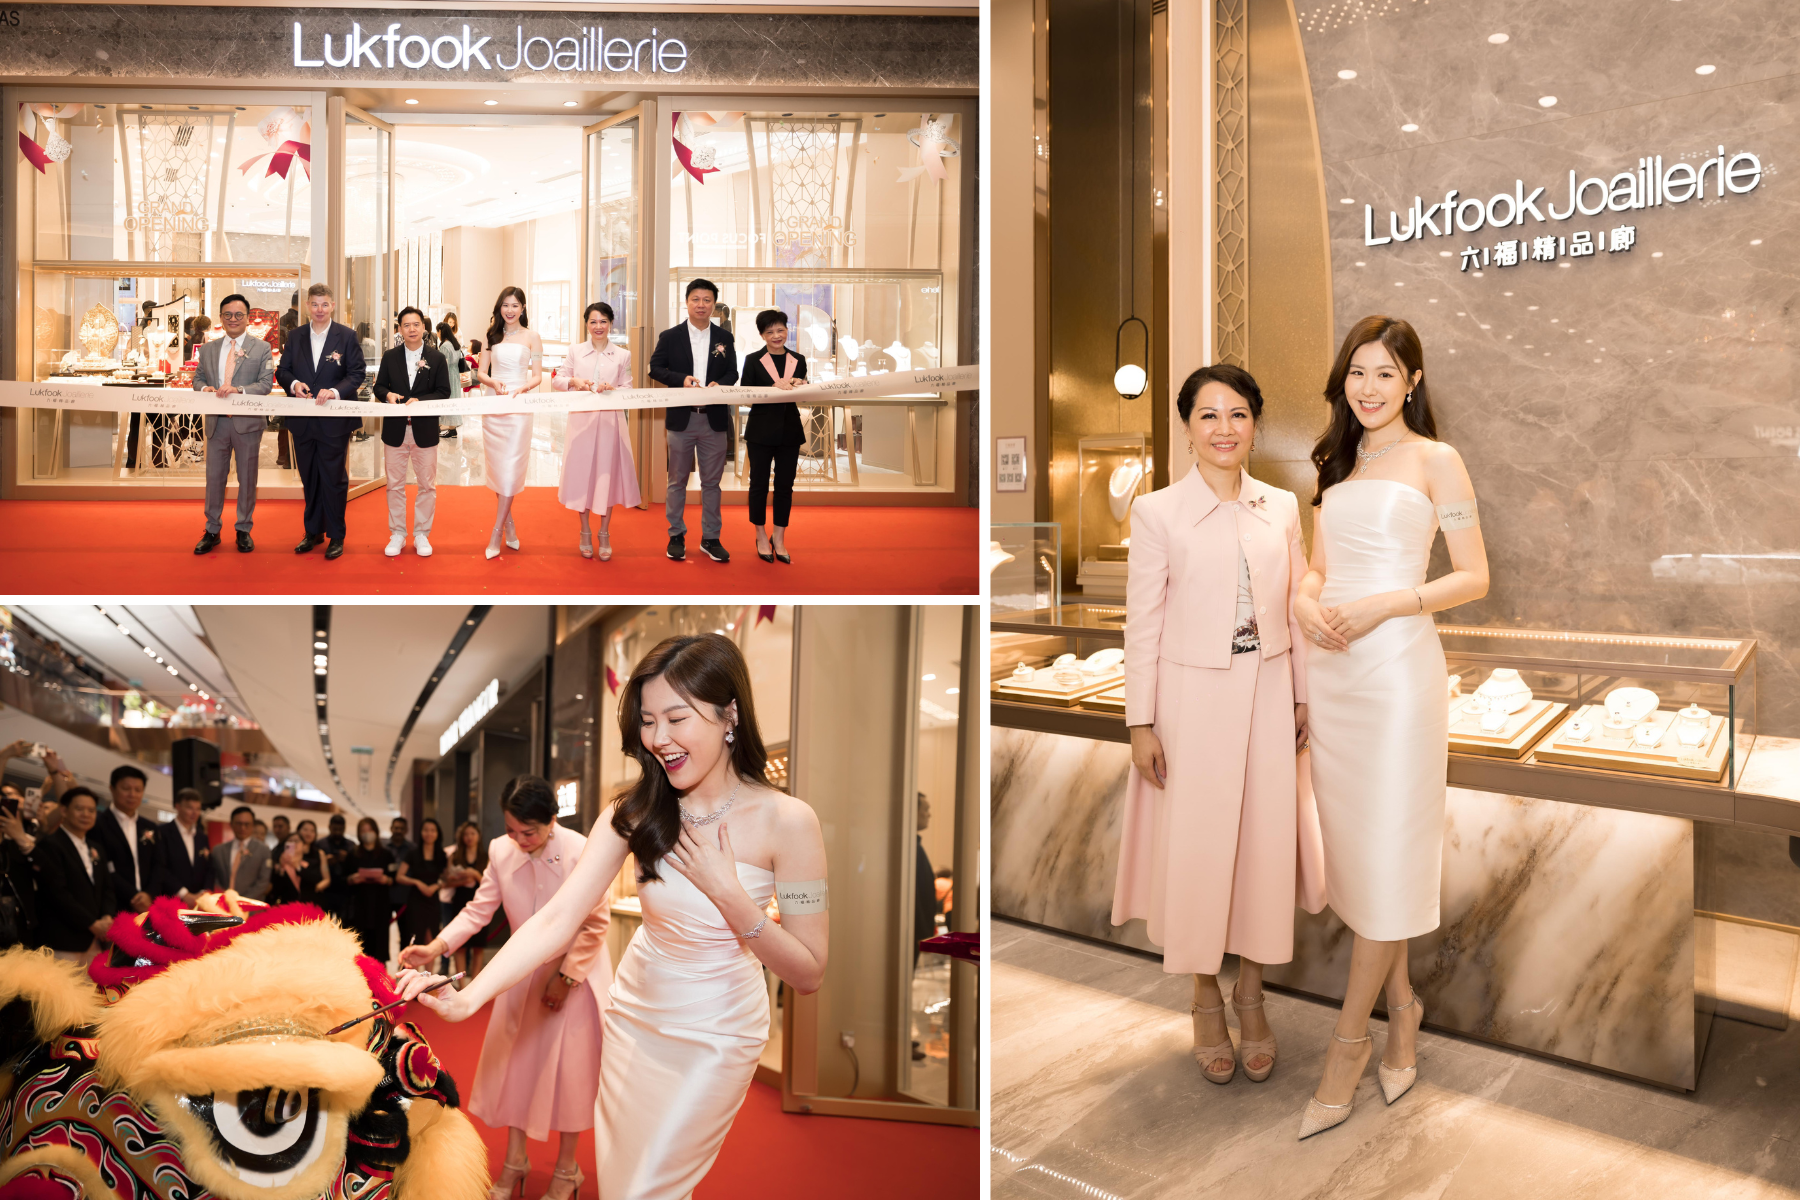 LukFook Group celebrates the grand opening of the Lukfook Joaillerie shop at Tun Razak Exchange (TRX) in Malaysia with key figures (from left to right) Mr. Darwin Cheung, Mr. Trevor Hill, Mr. Billy Cheung, Ms. Moon Lau, Ms. Shirley Wong, Mr. Chan Kah Hui and Ms. Wendy Kan.